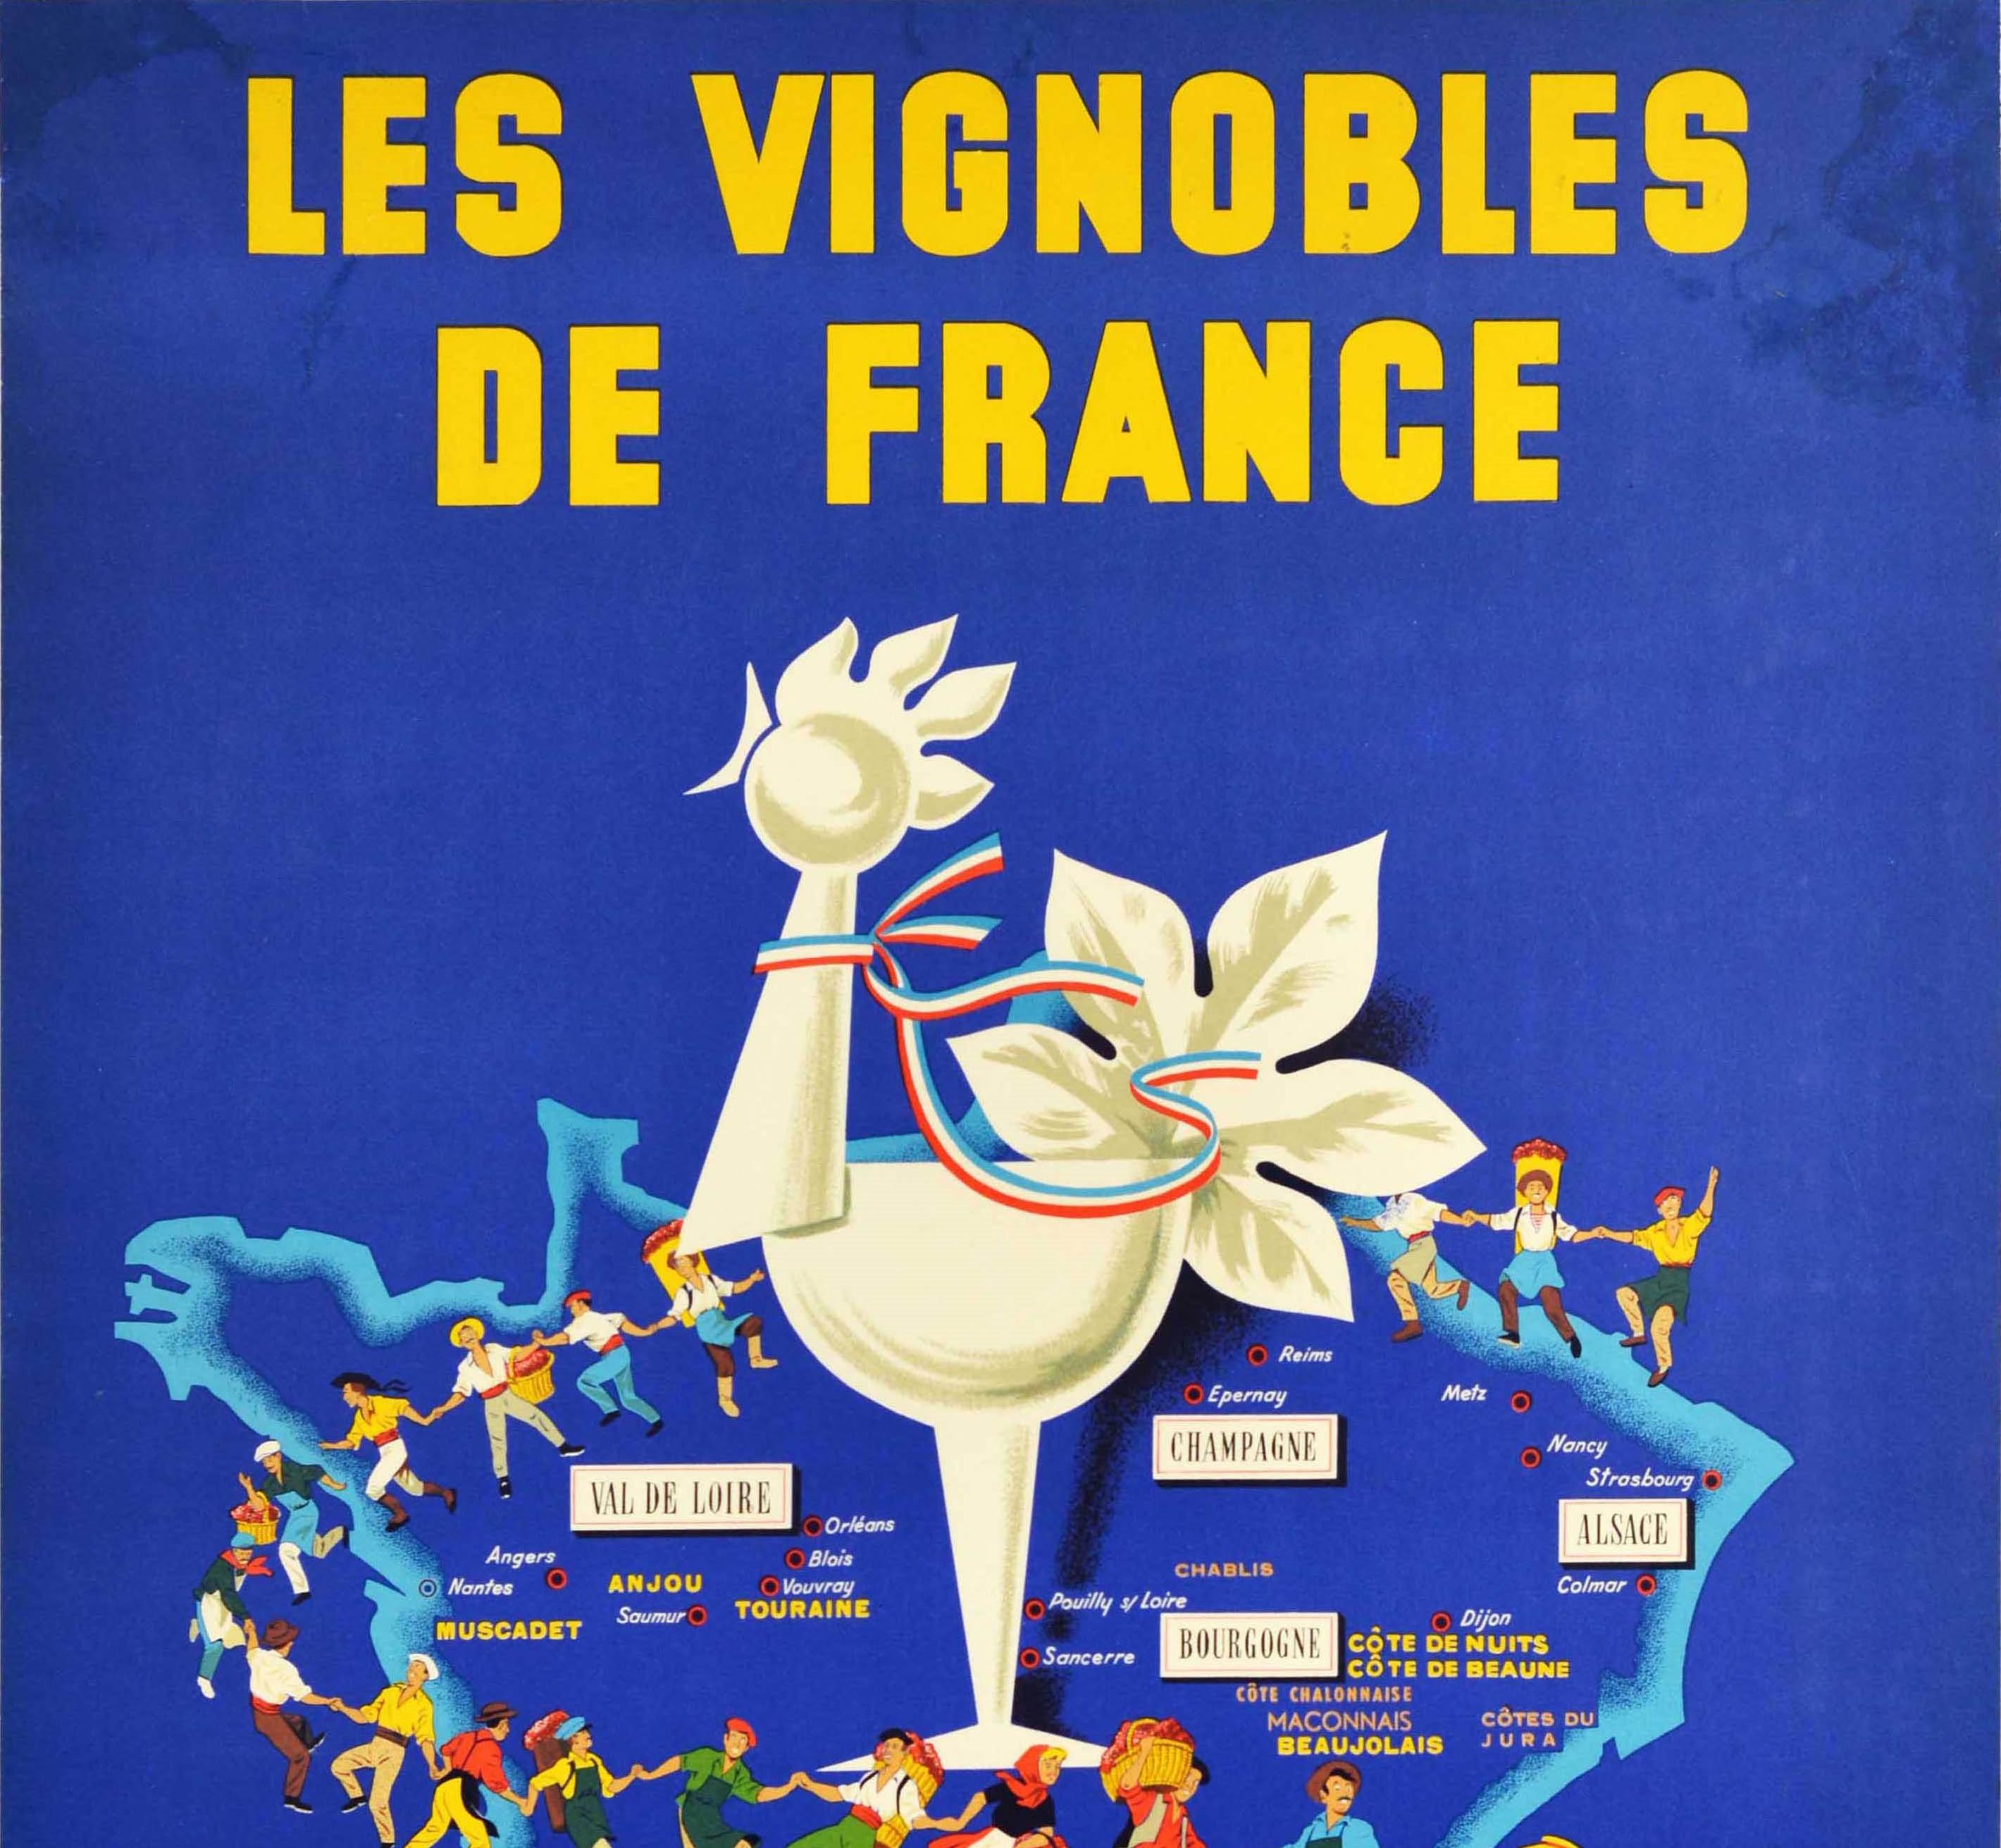 Original vintage drink advertising poster for The Vineyards Of France / Les Vignobles De France Production Metropolitaine featuring a colourful pictorial map design showing a line of dancing wine growers and sellers some carrying baskets of grapes